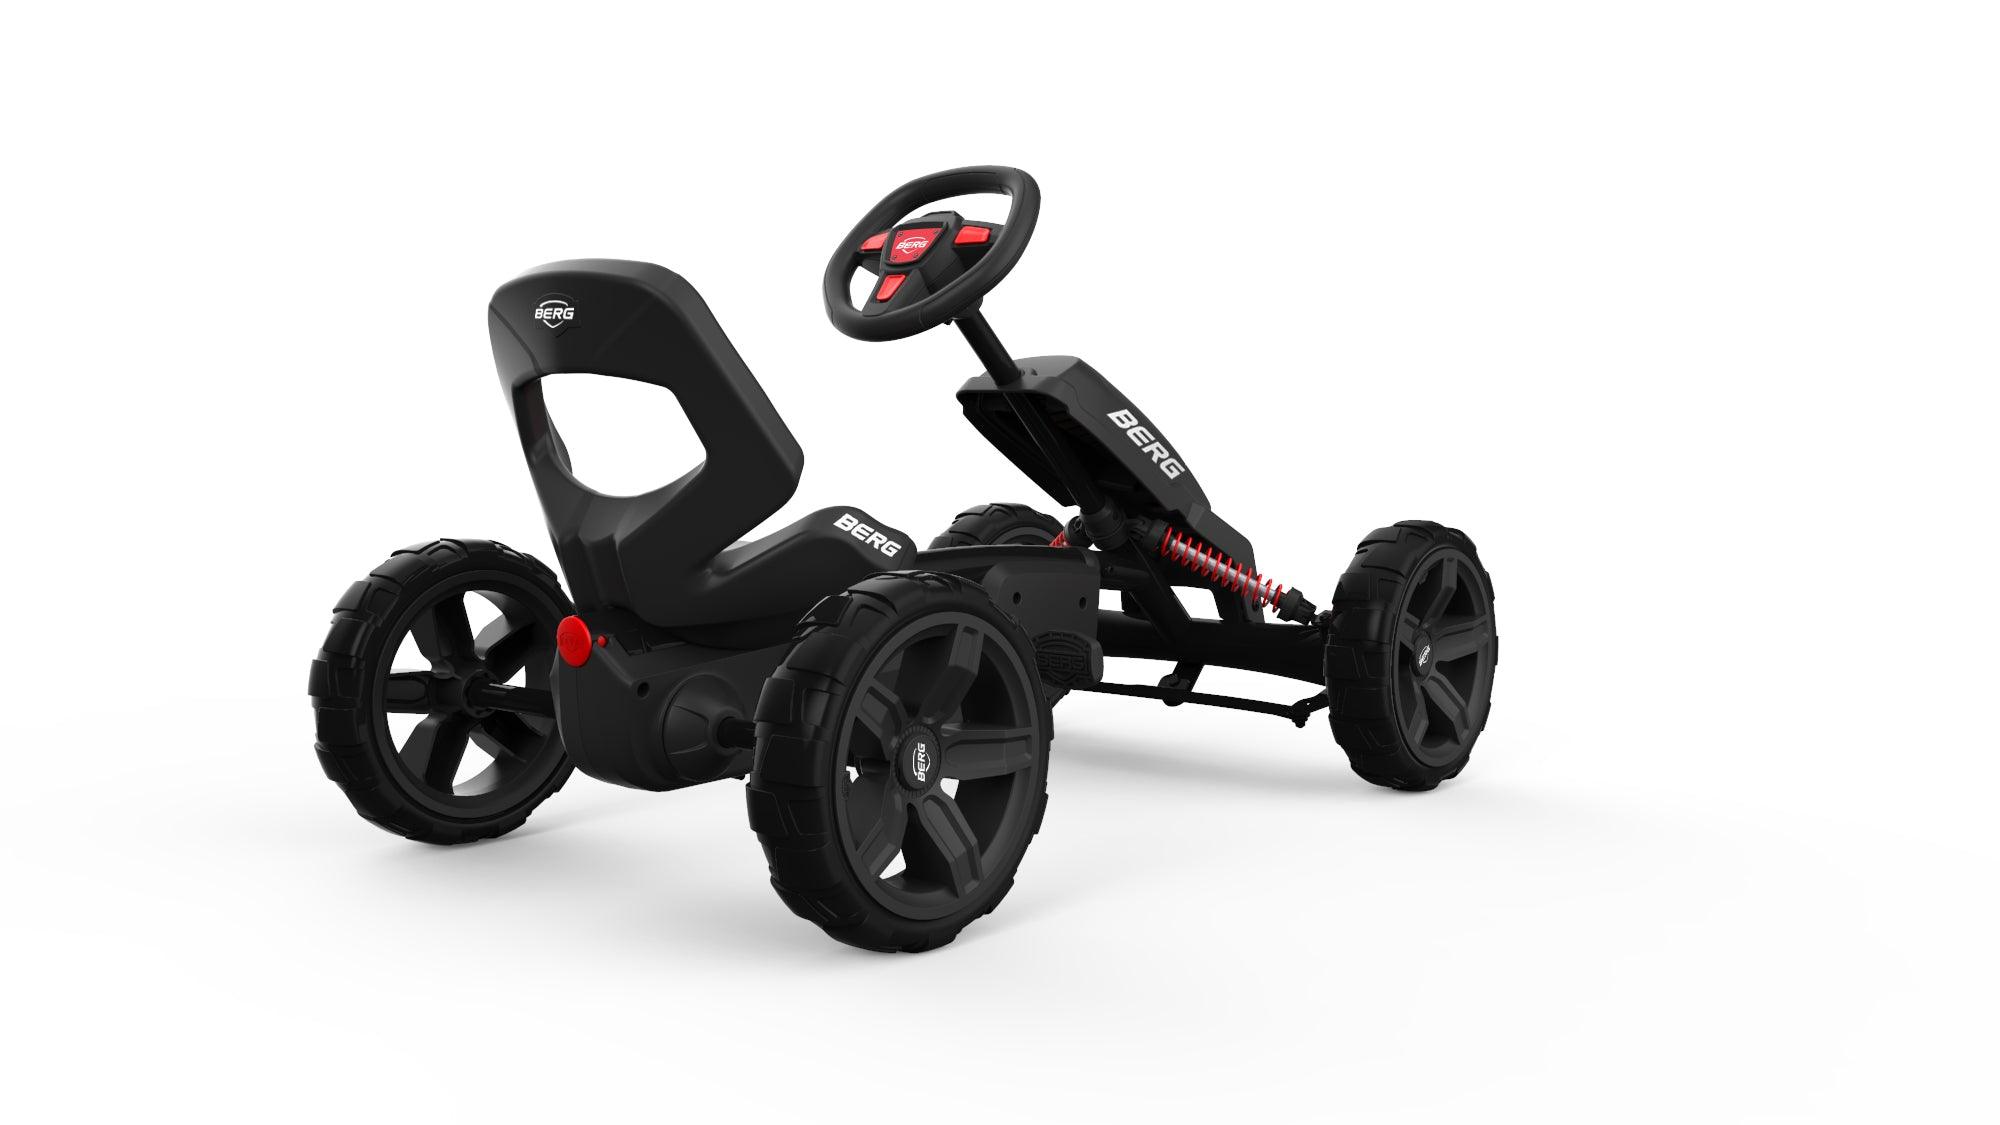 Berg Pedal Kart Reppy Rebel Black | Pedal Go Kart, Ride On Toys for Boys and Girls, Go Kart, Outdoor Games and Outdoor Toys, Adaptable to Body Lengt